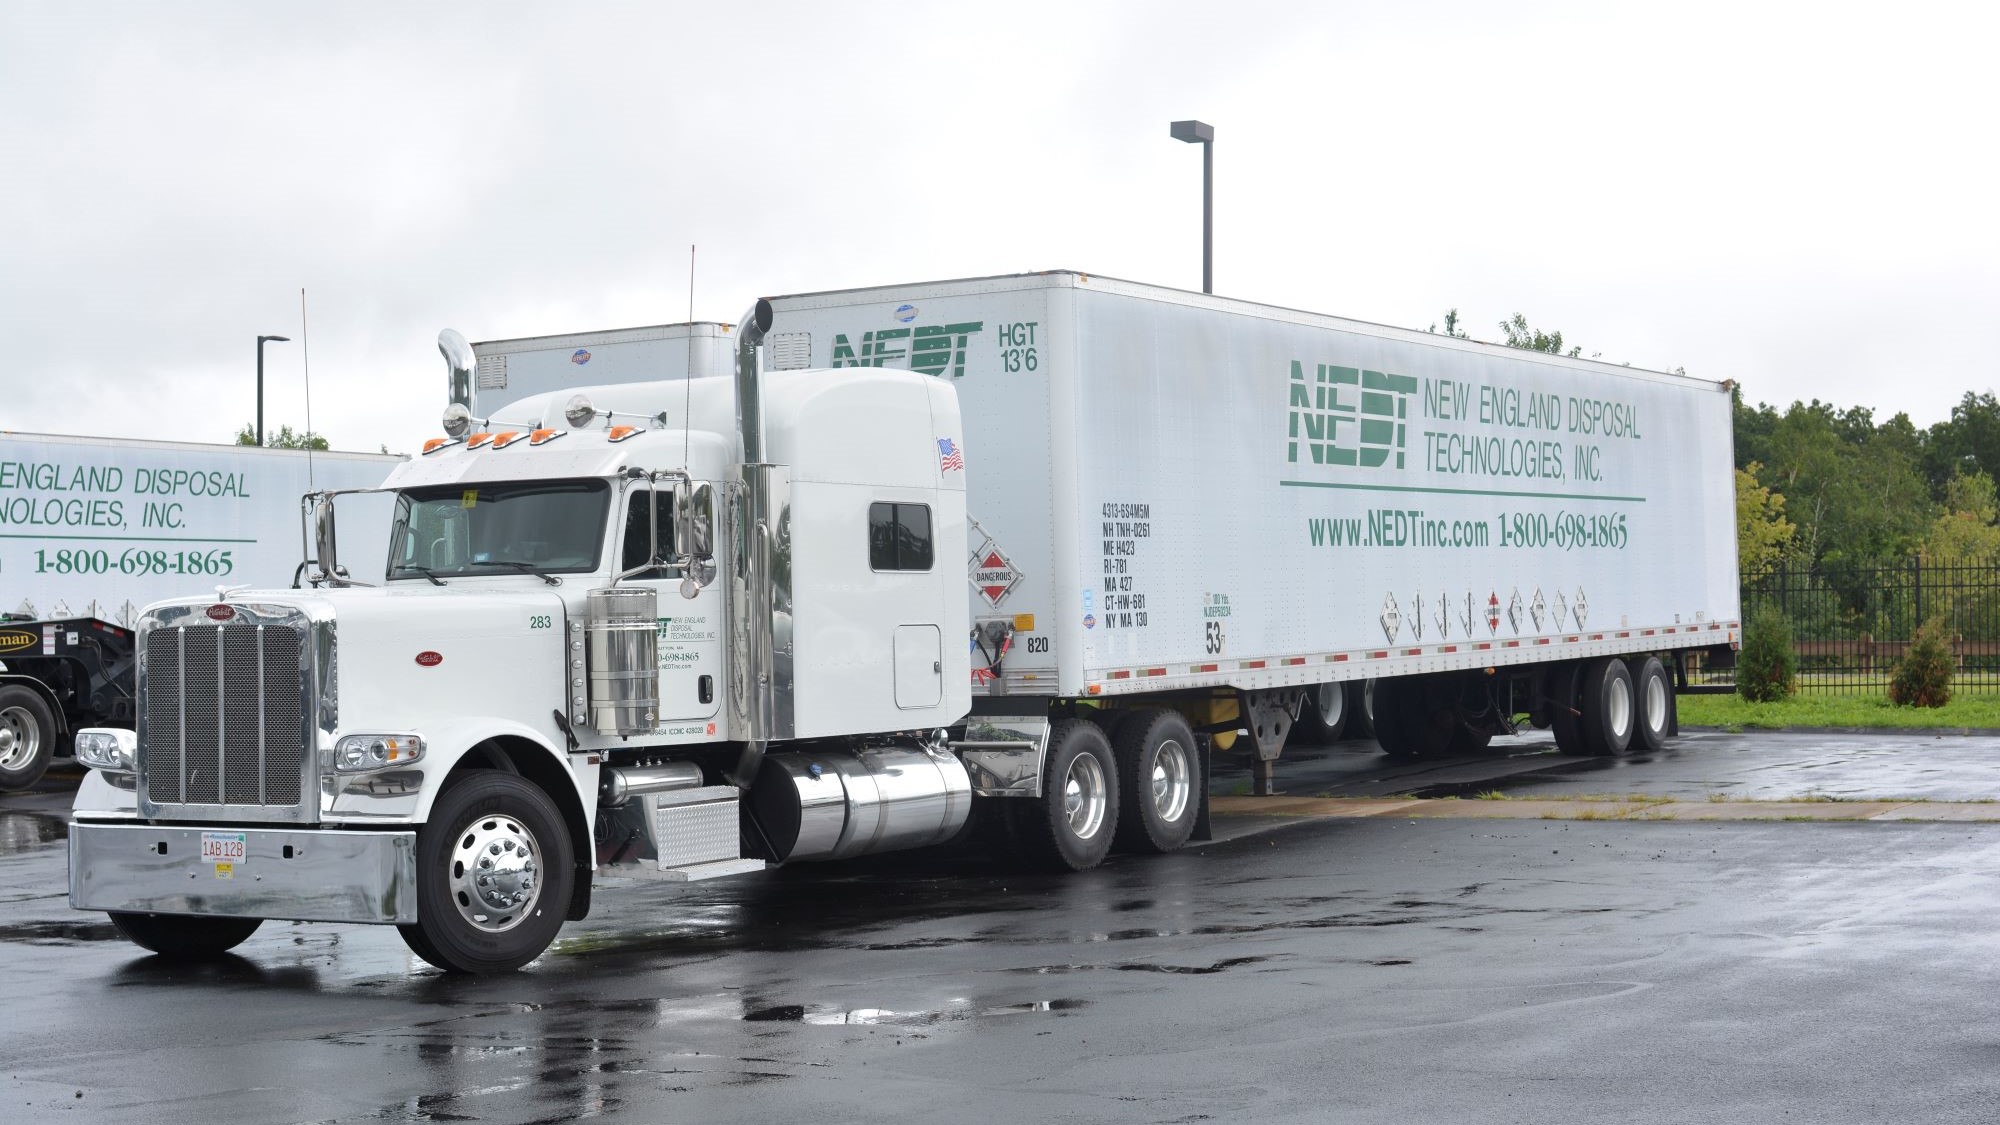 NEDT box truck for hazardous waste transportation and disposal.